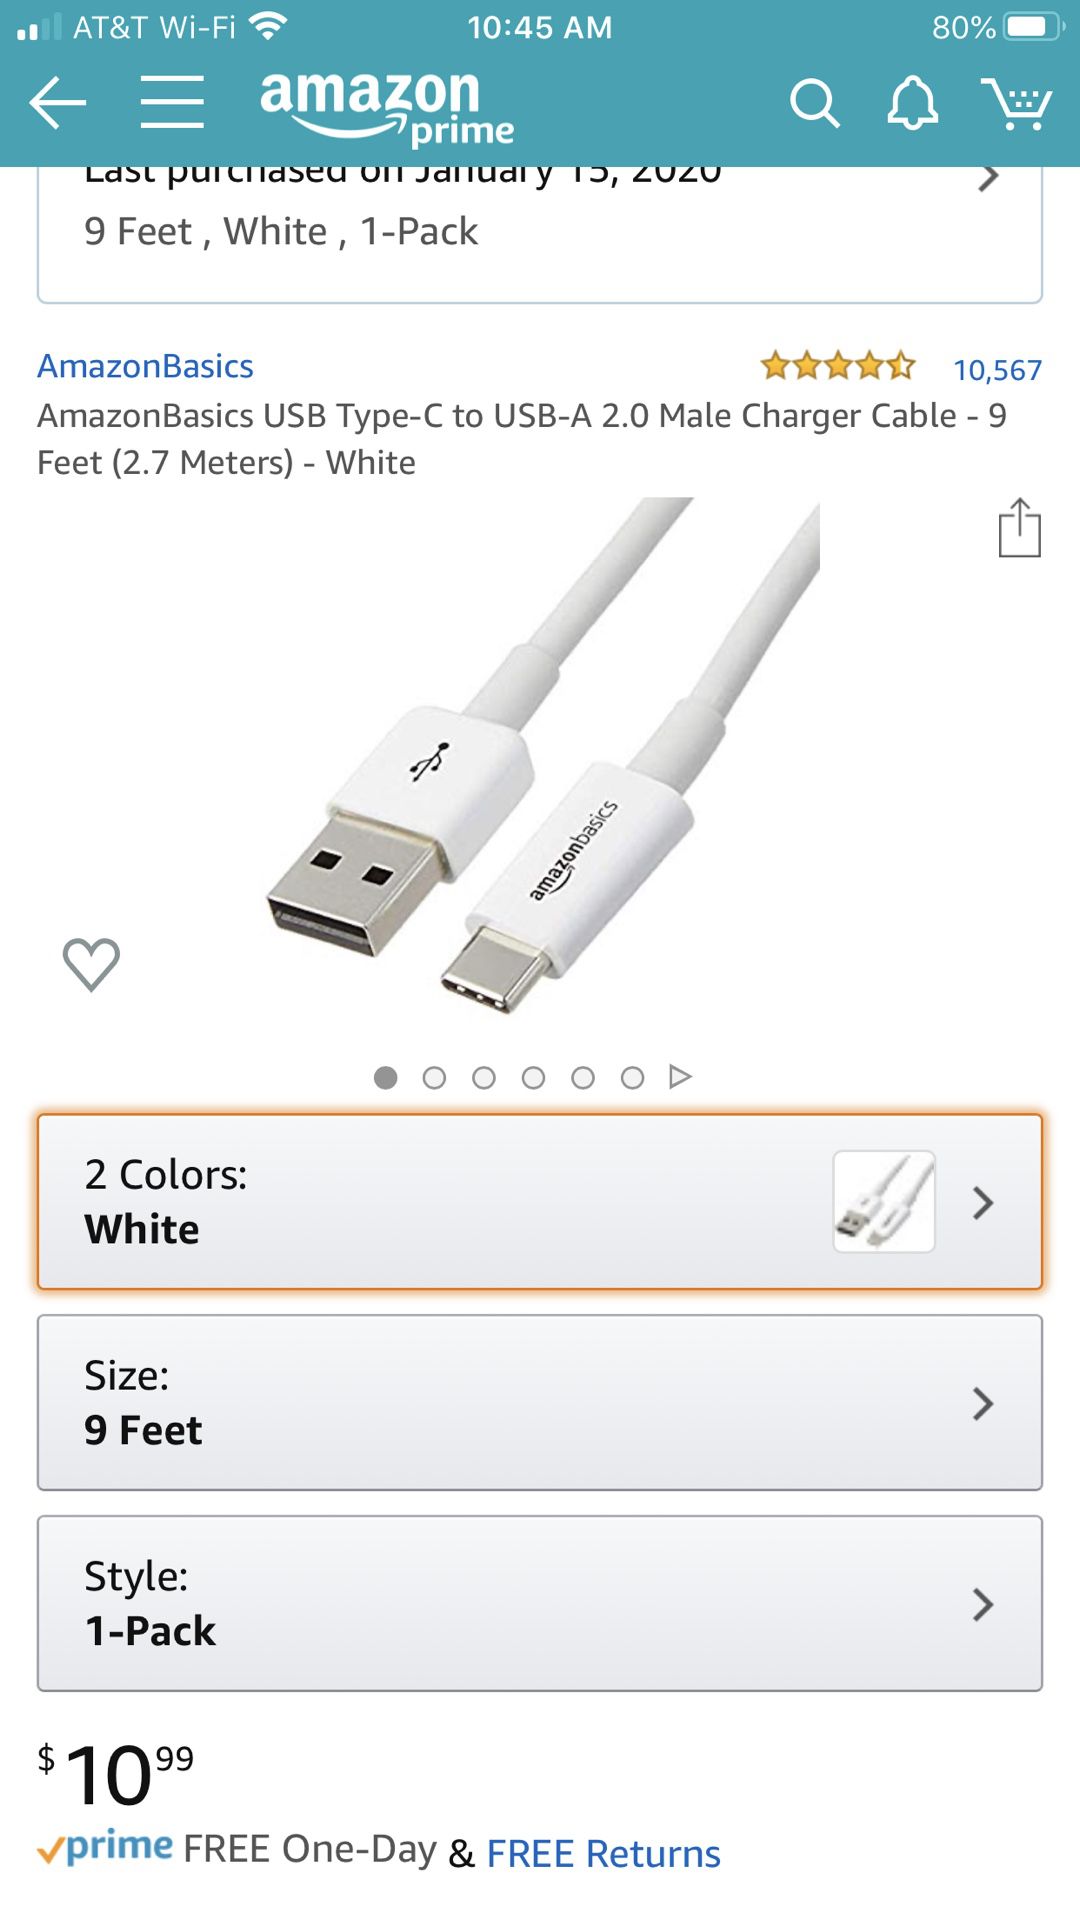 AmazonBasics USB Type-C to USB-A 2.0 Male Charger Cable